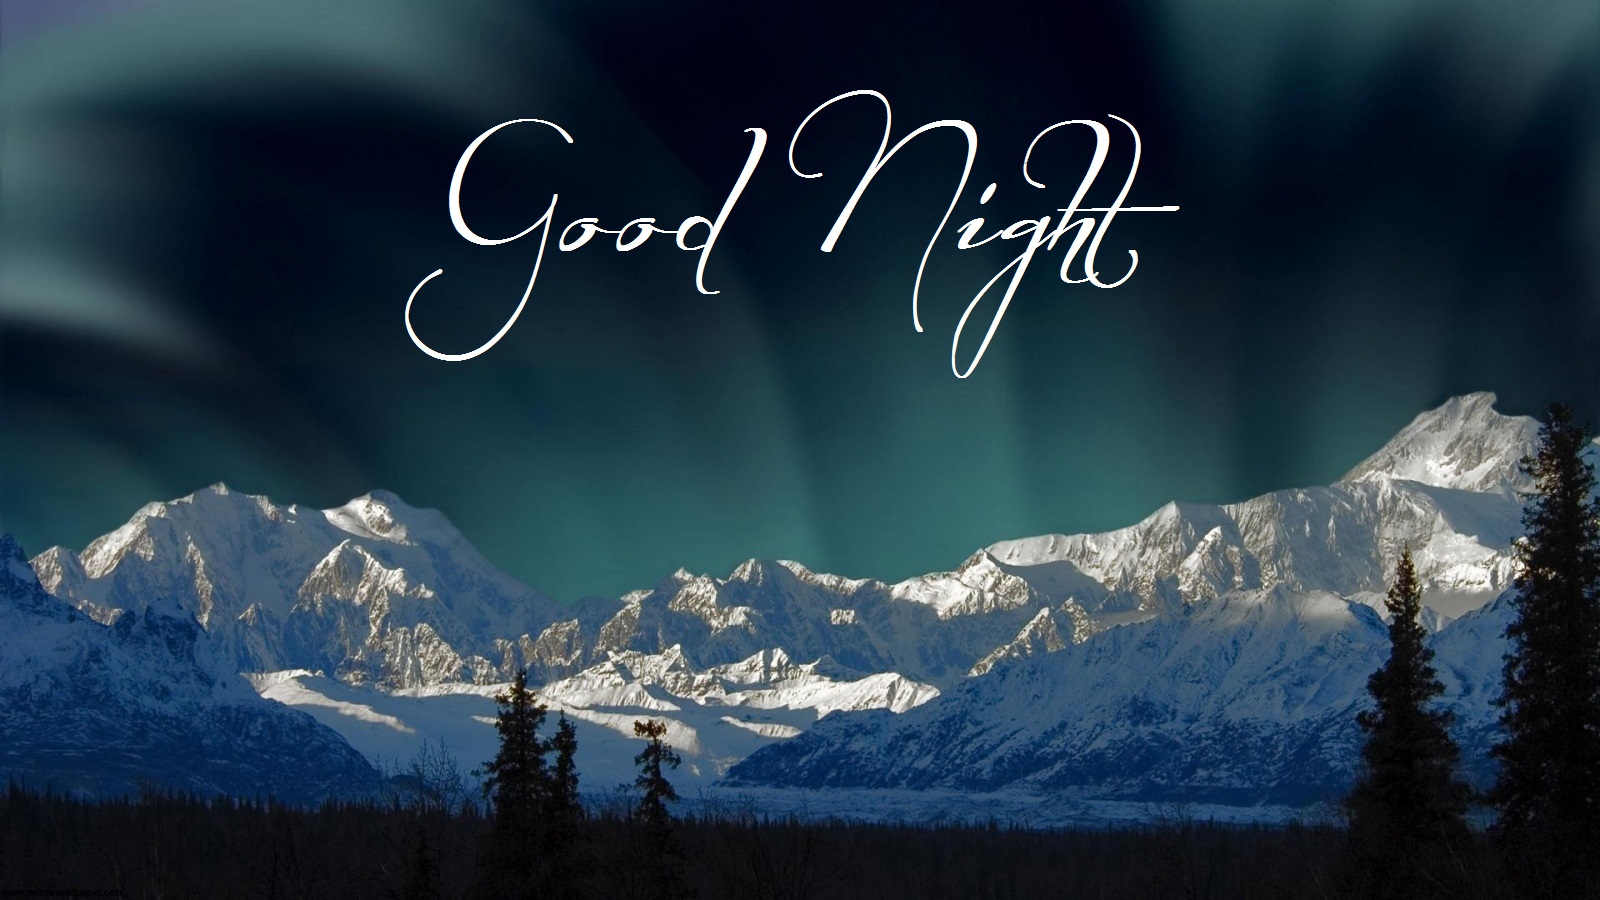 good night wallpaper with quotes,sky,font,mountain,mountainous landforms,natural landscape